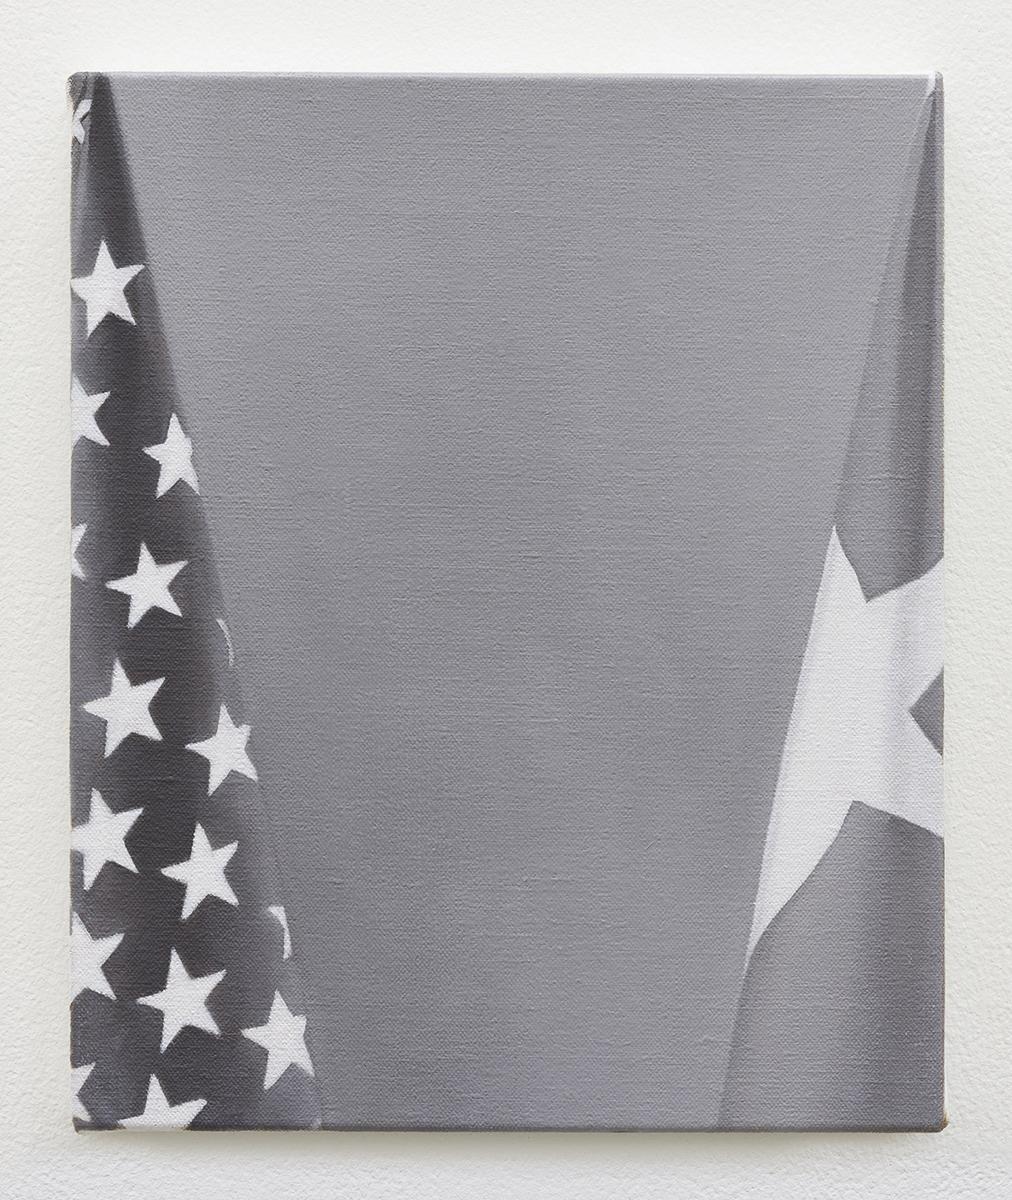  Flags | oil on linen | 30 x 25 cm | Private Collection | Photo by Lee Welch 